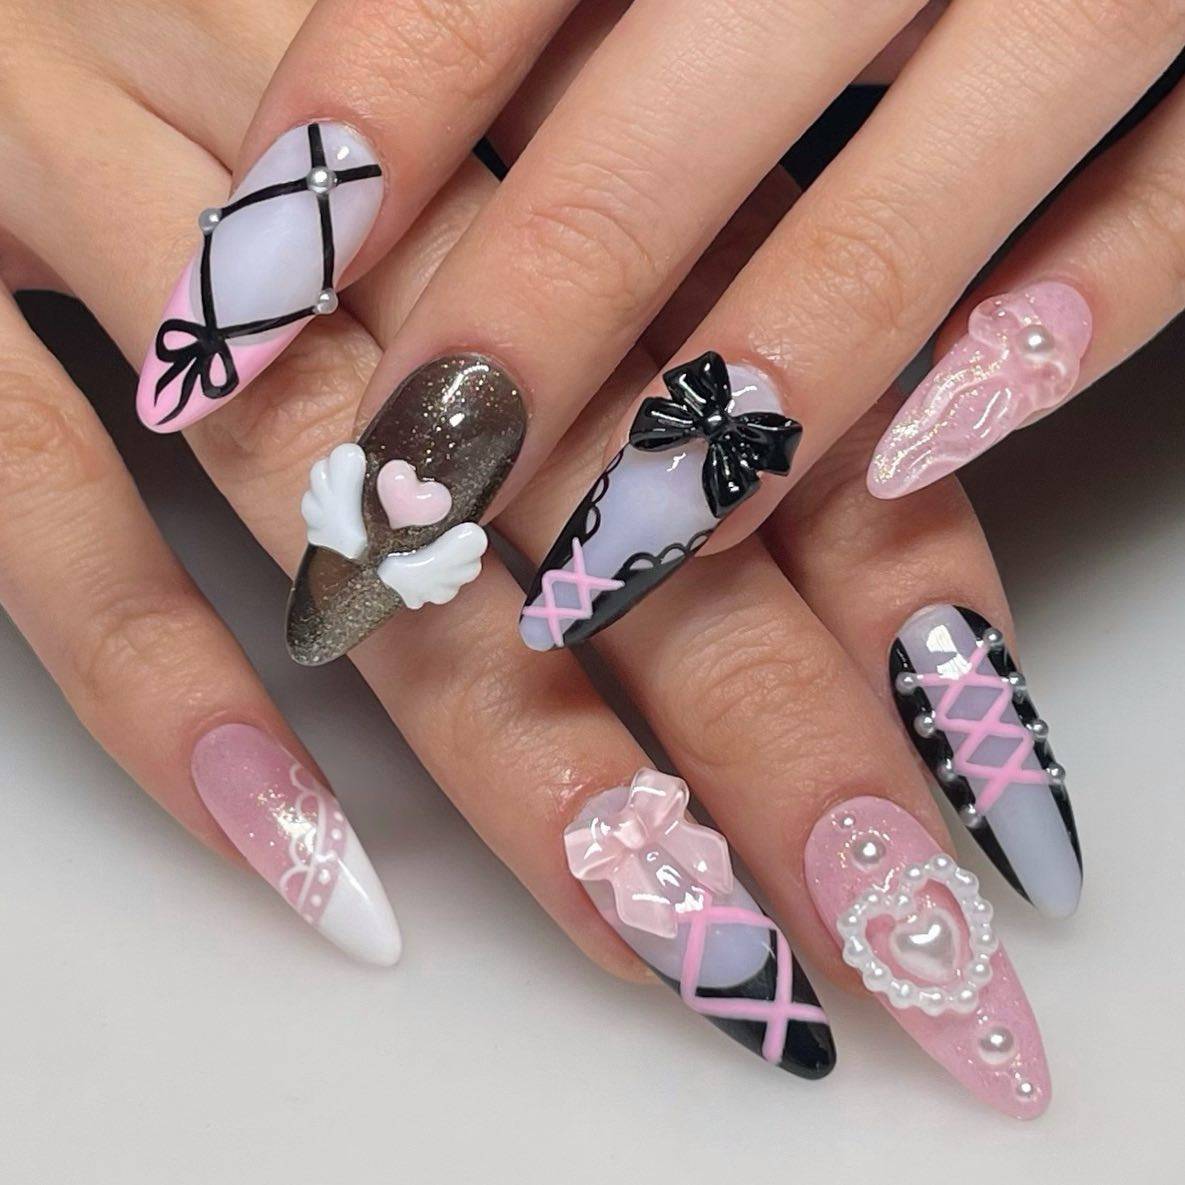 27 Stunning Coquette Nails To Make You A Runway Model - 175